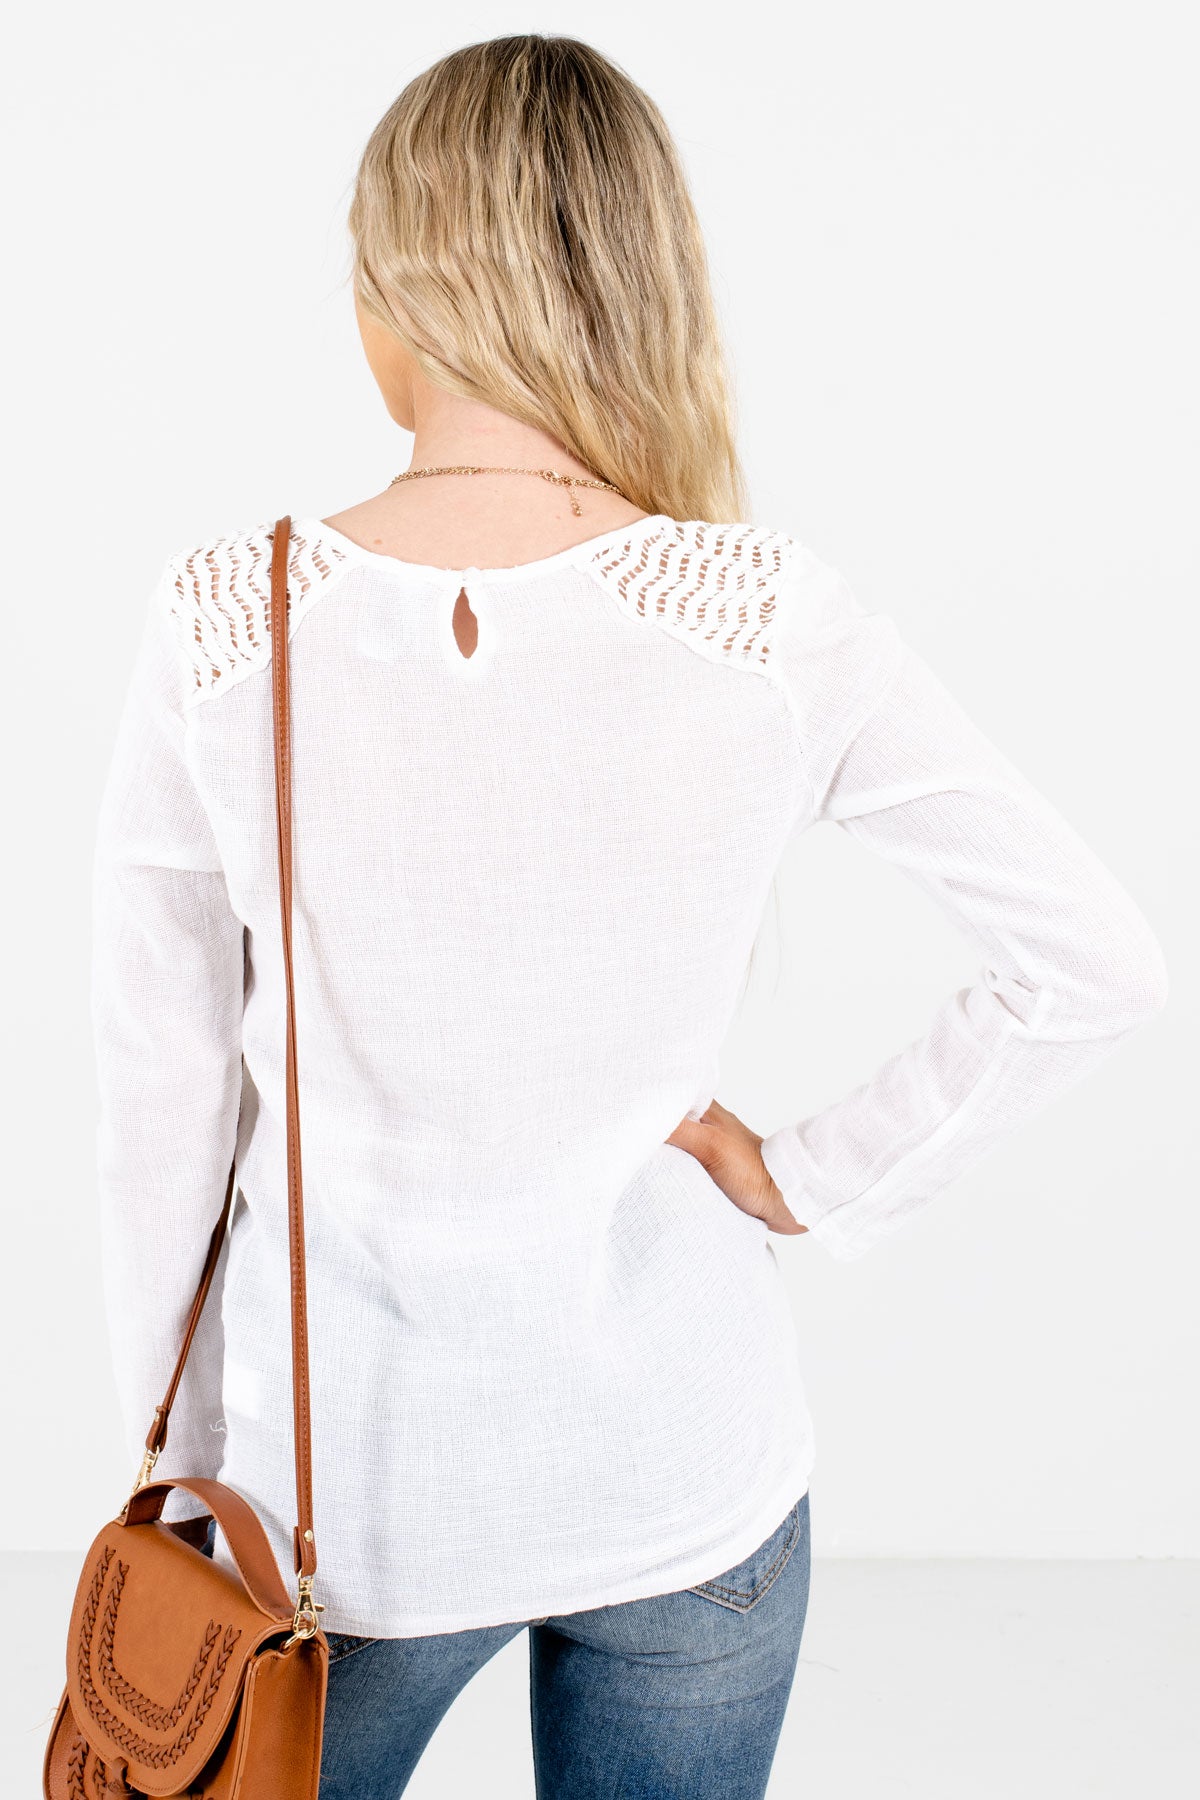 Women’s White Long Sleeve Boutique Tops